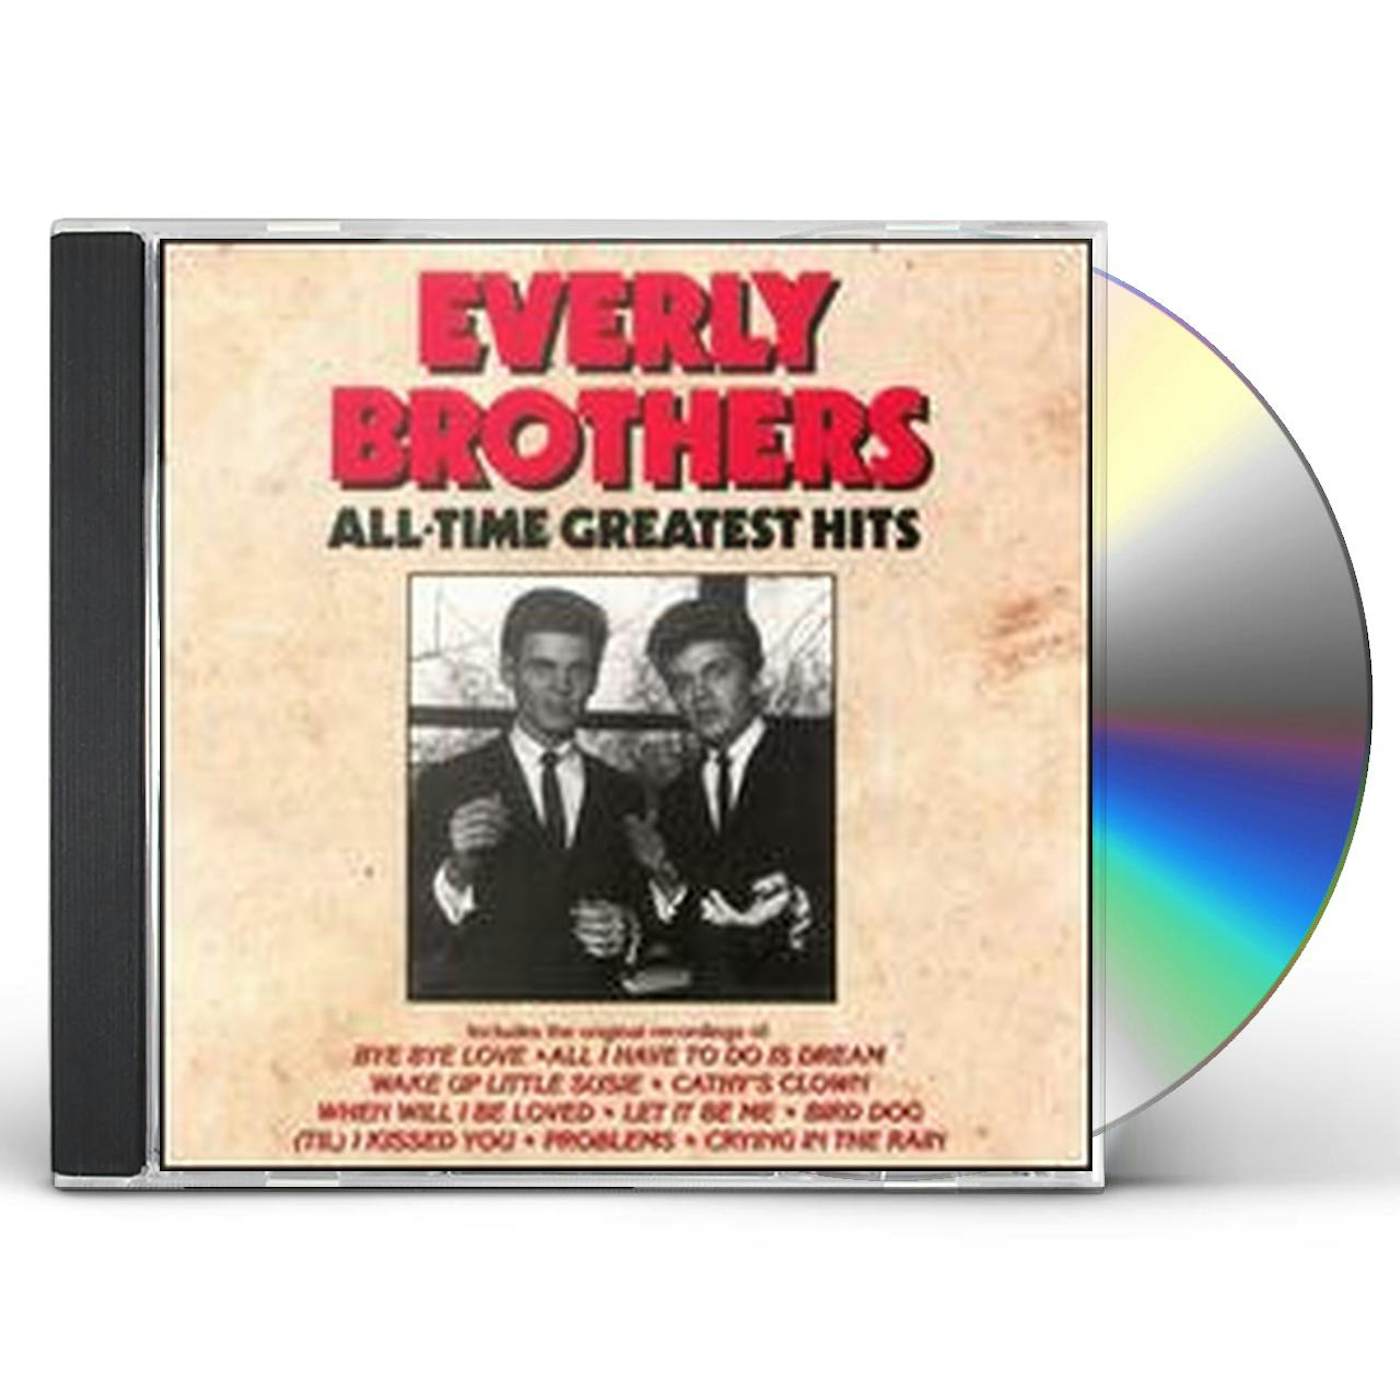 The Everly Brothers ALL TIME GREATEST HITS CD